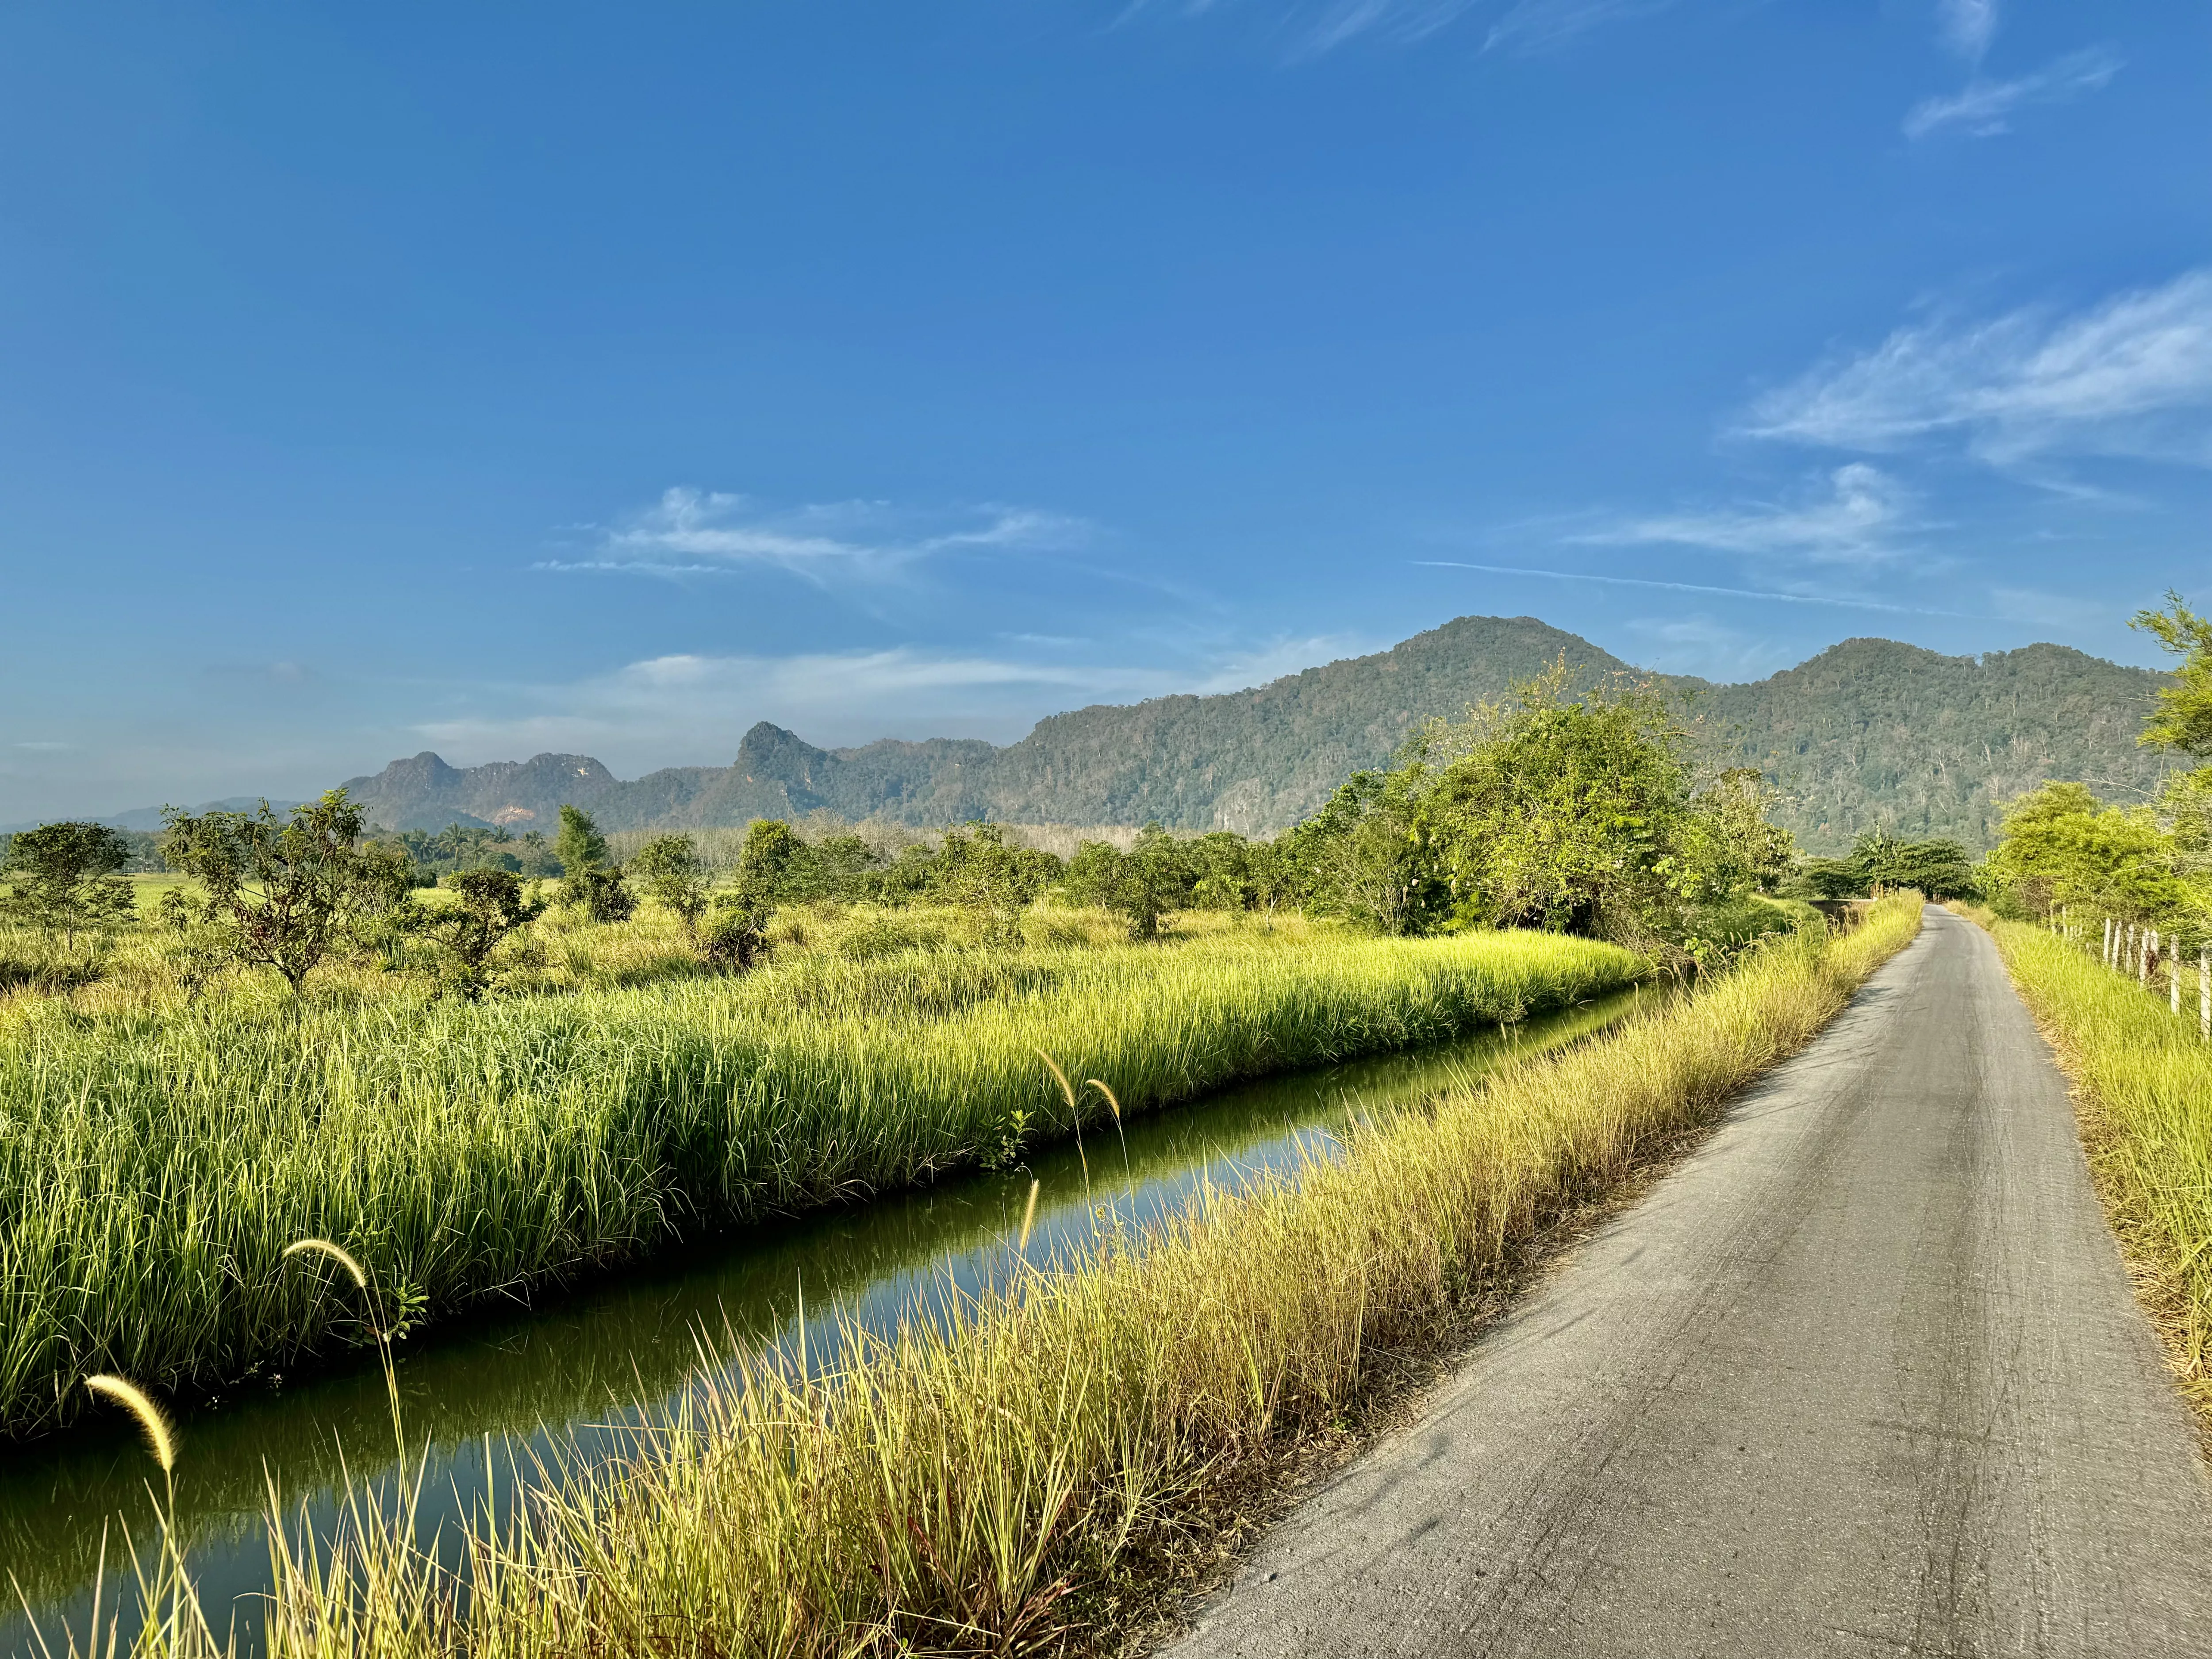 Small farm roads in Malaysia with green rice fields and mountains